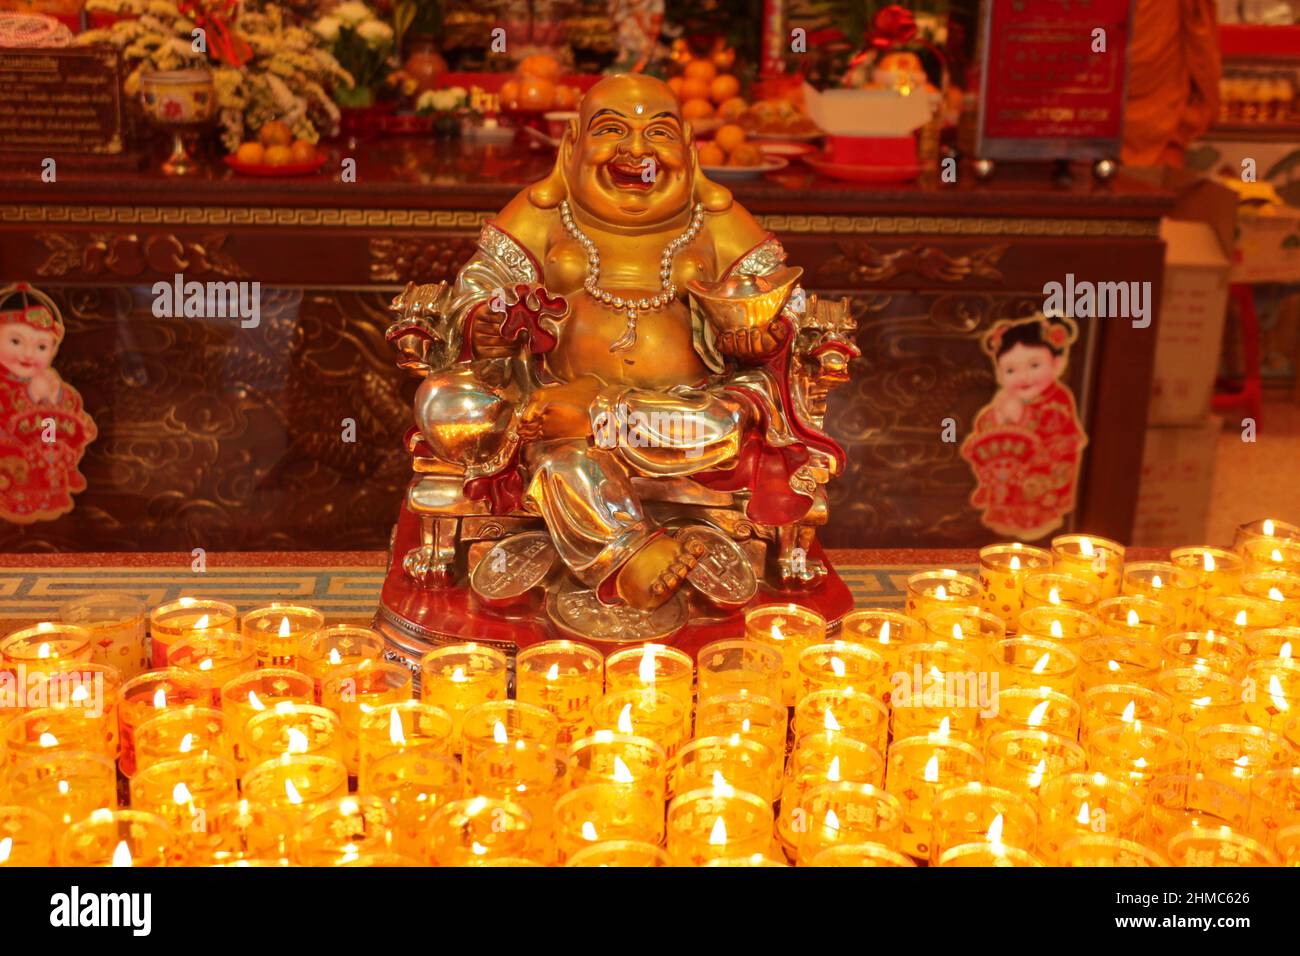 Smiling Golden Buddha Statue, Chinese God of Happiness with candles as offerings in foreground, Chinatown, Bangkok,Thailand Stock Photo